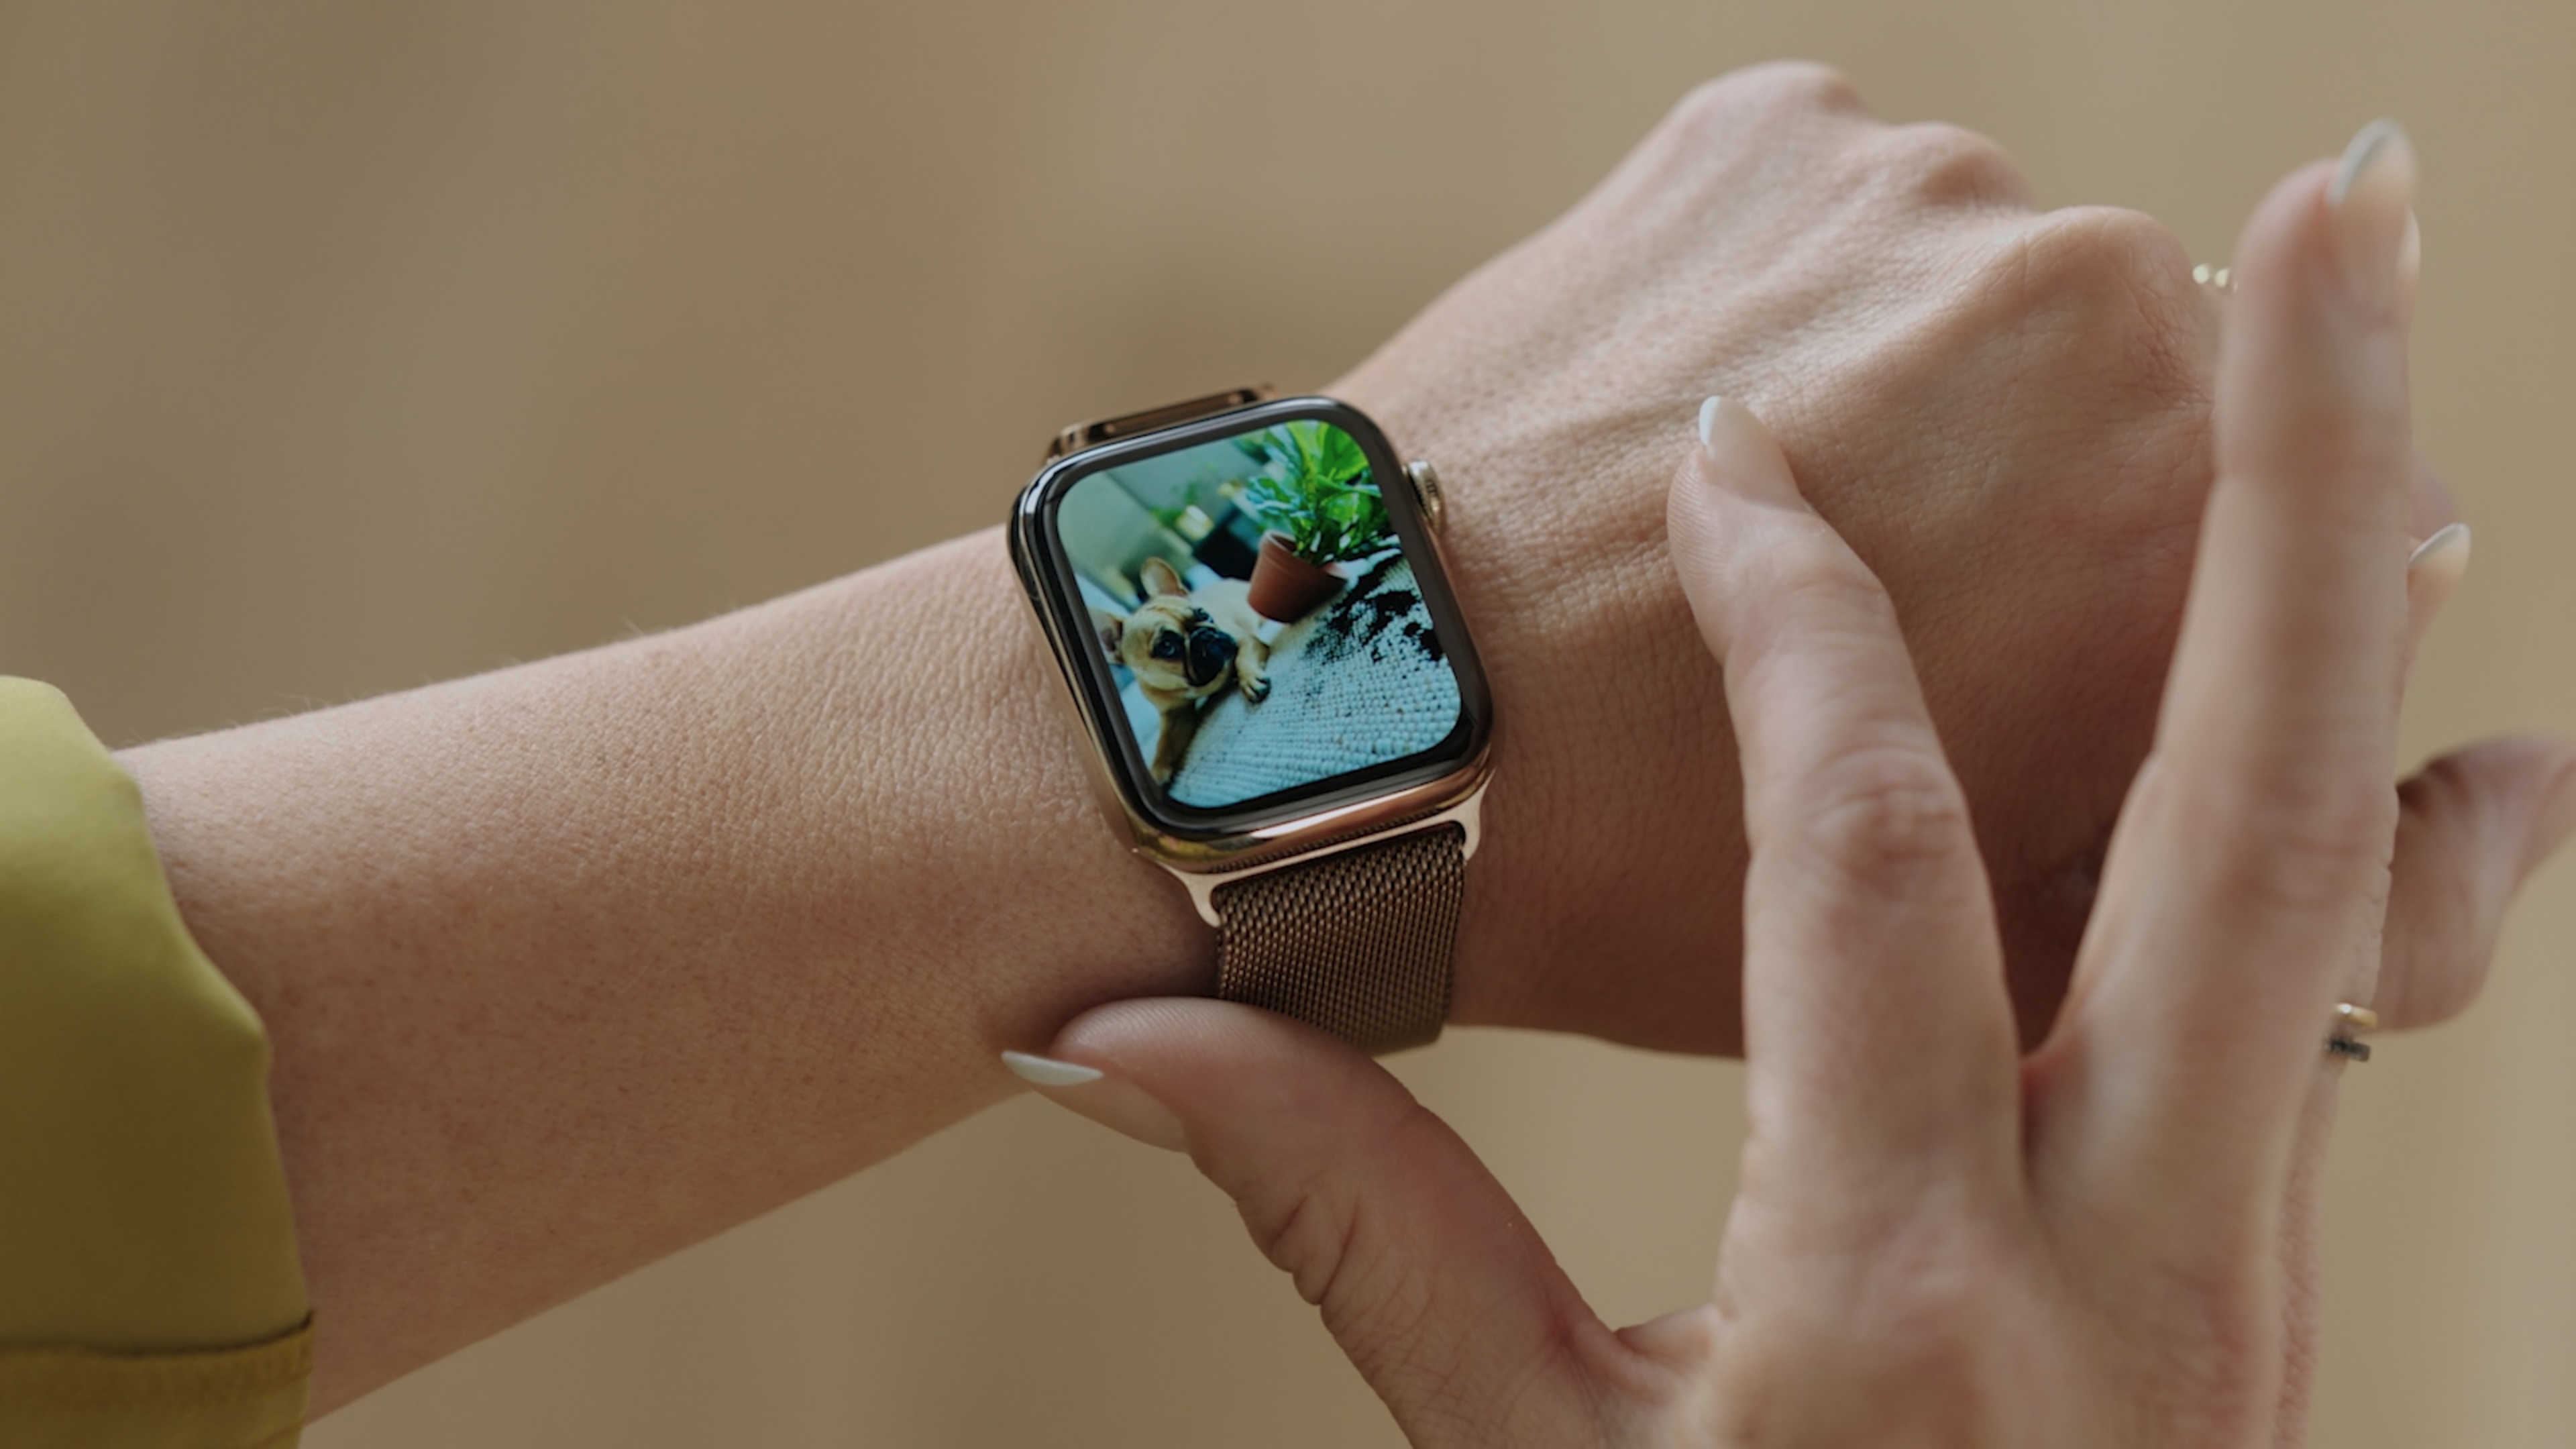 watchOS 8 brings new mindfulness features and respiratory tracking